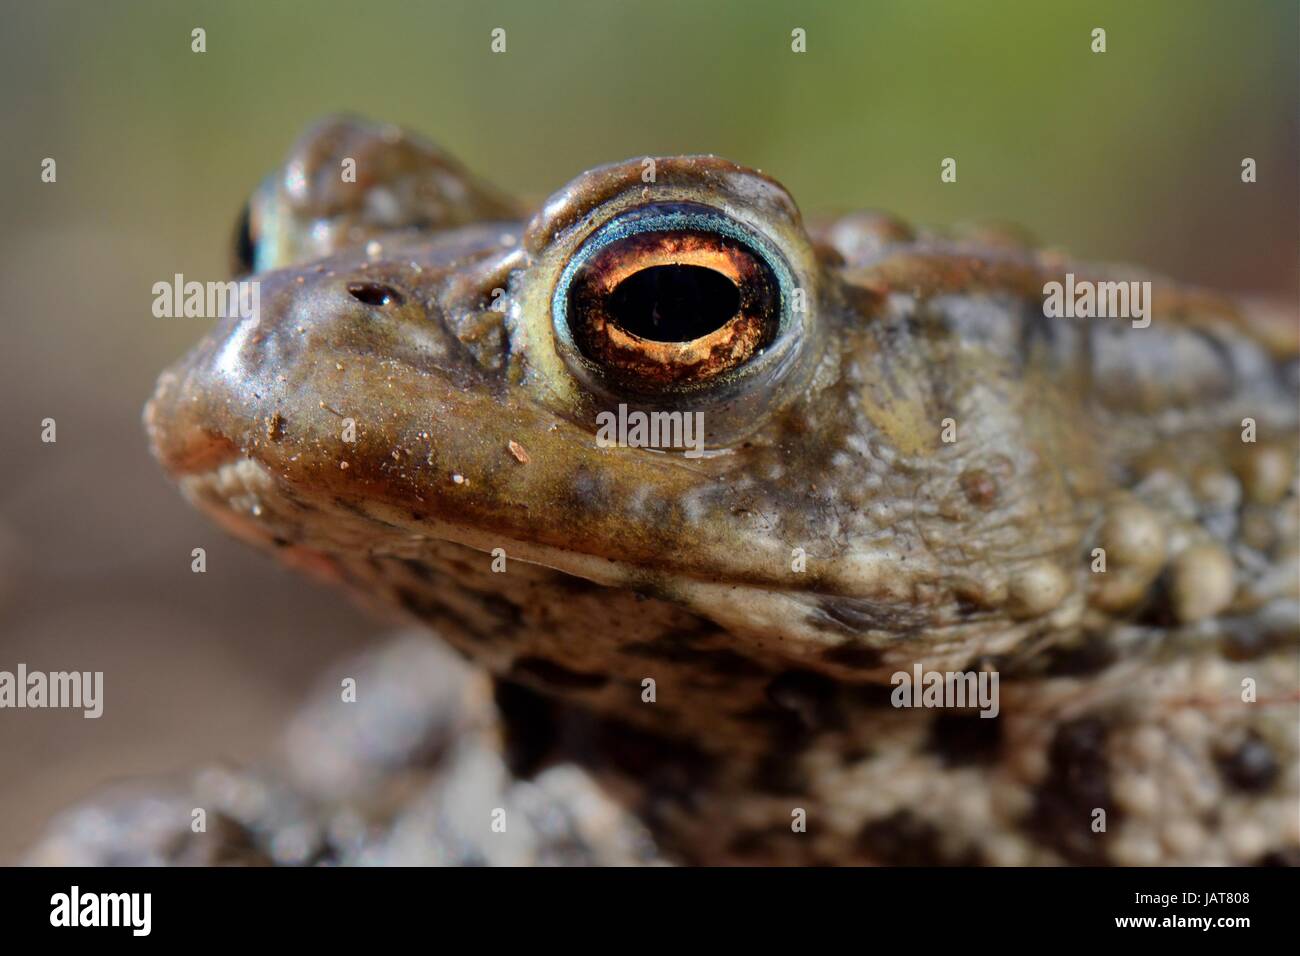 Head portrait of Common toad (Bufo bufo) in a garden flowerbed, Wiltshire, UK, March. Stock Photo